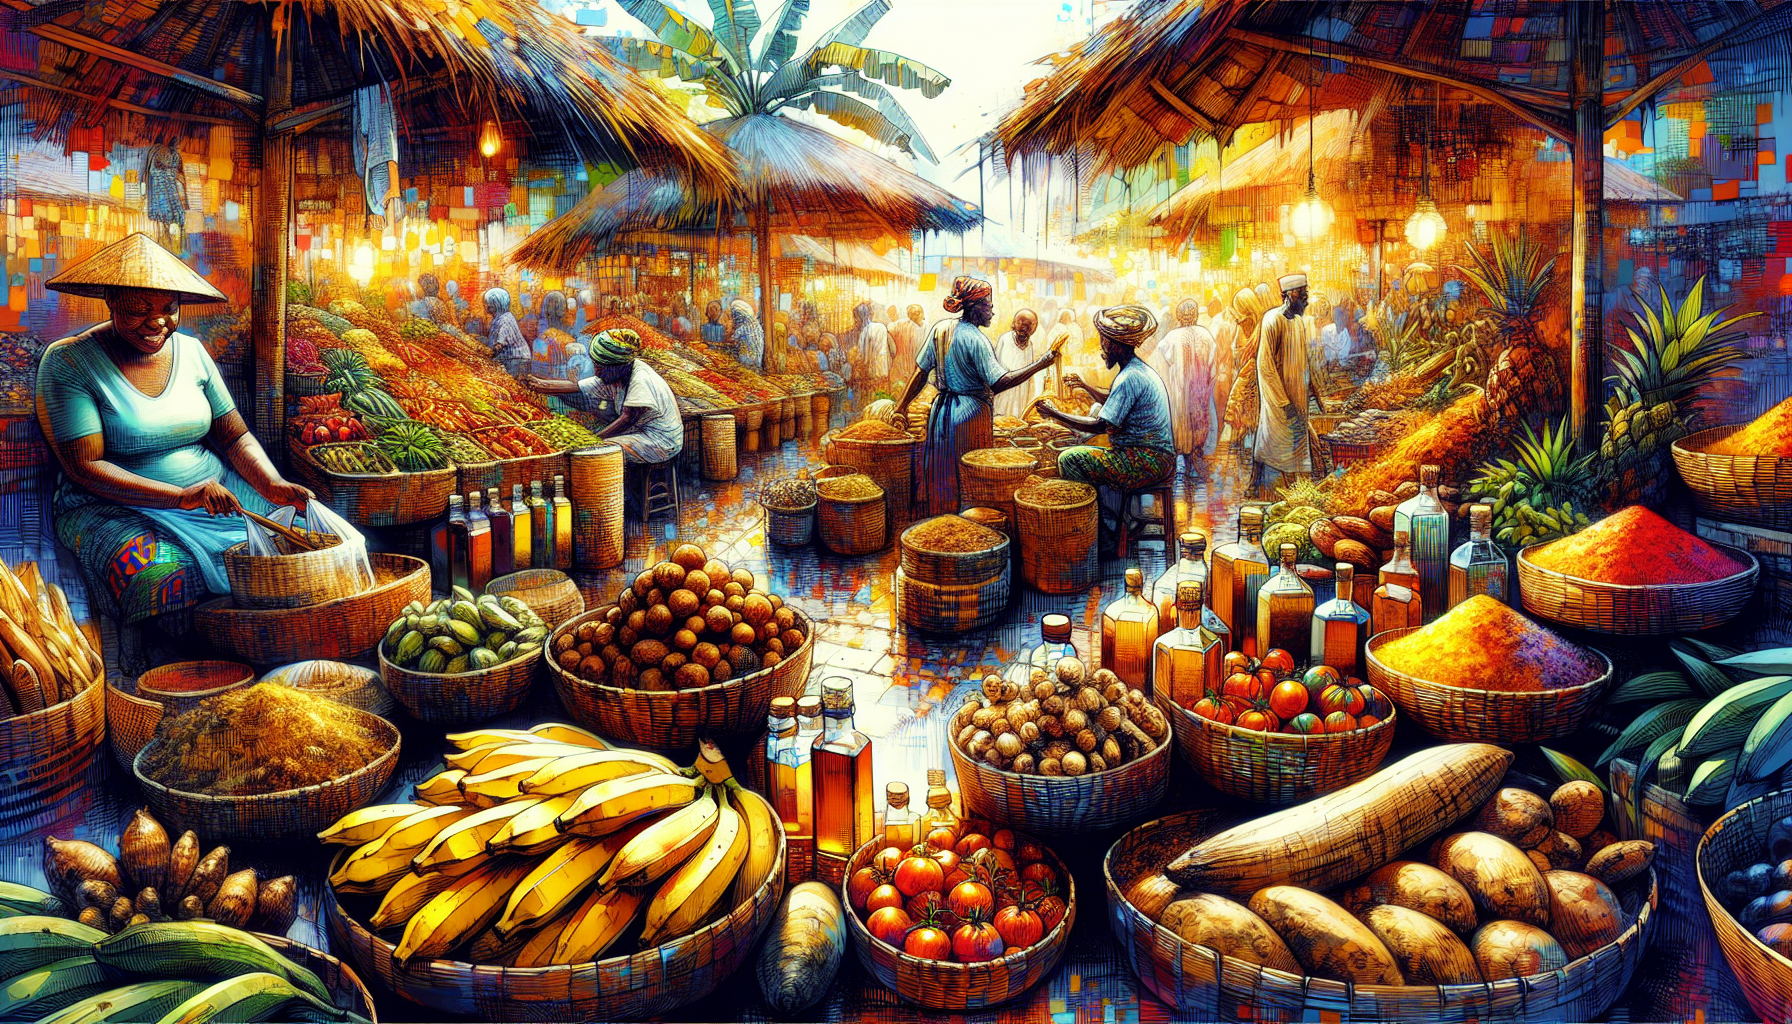 A colorful illustration of a bustling Congolese marketplace with various fruits, vegetables, and spices on display